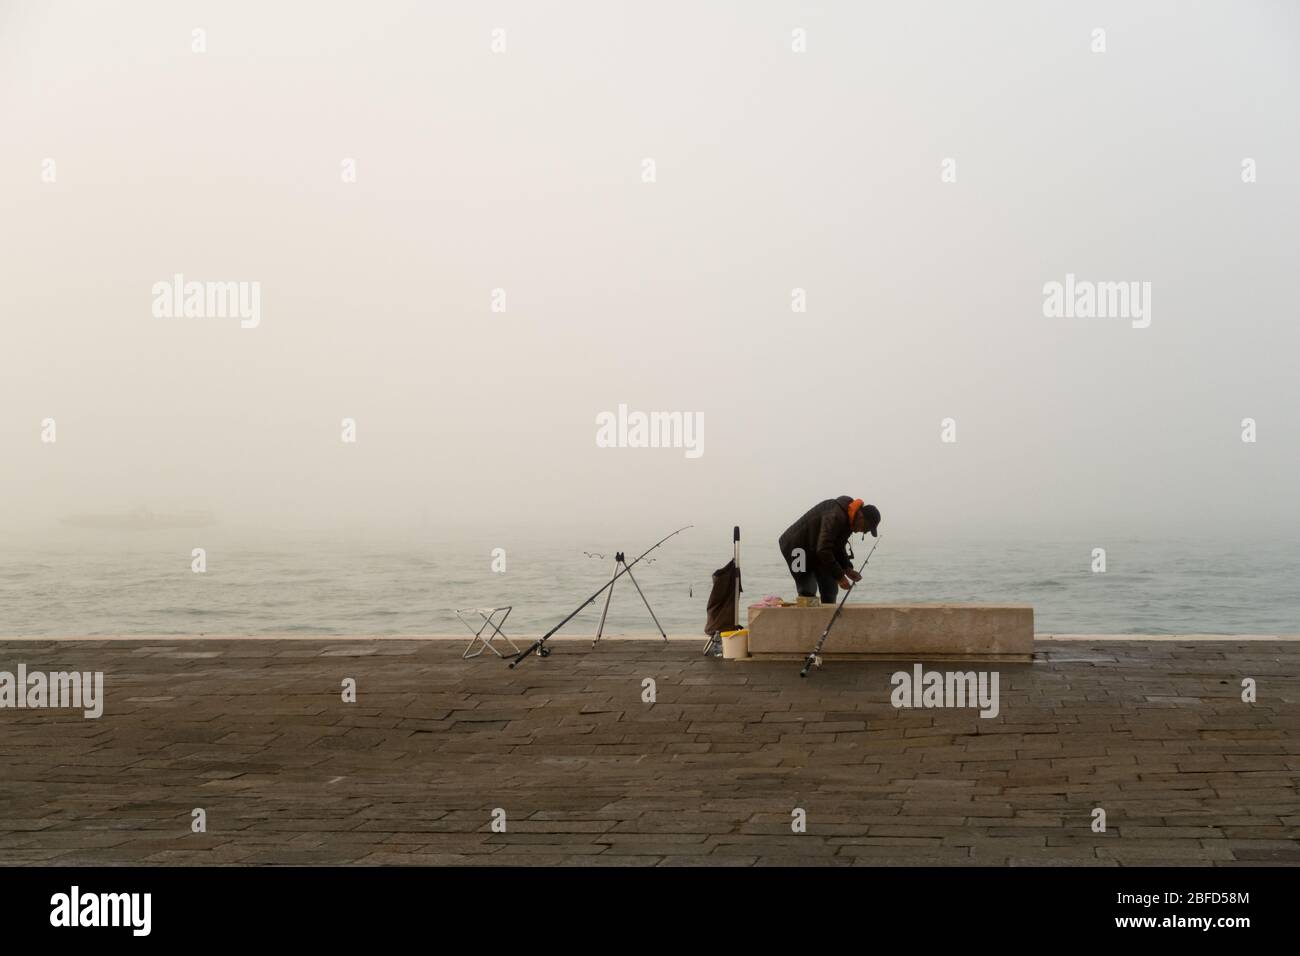 A man fishing on a foggy day Stock Photo